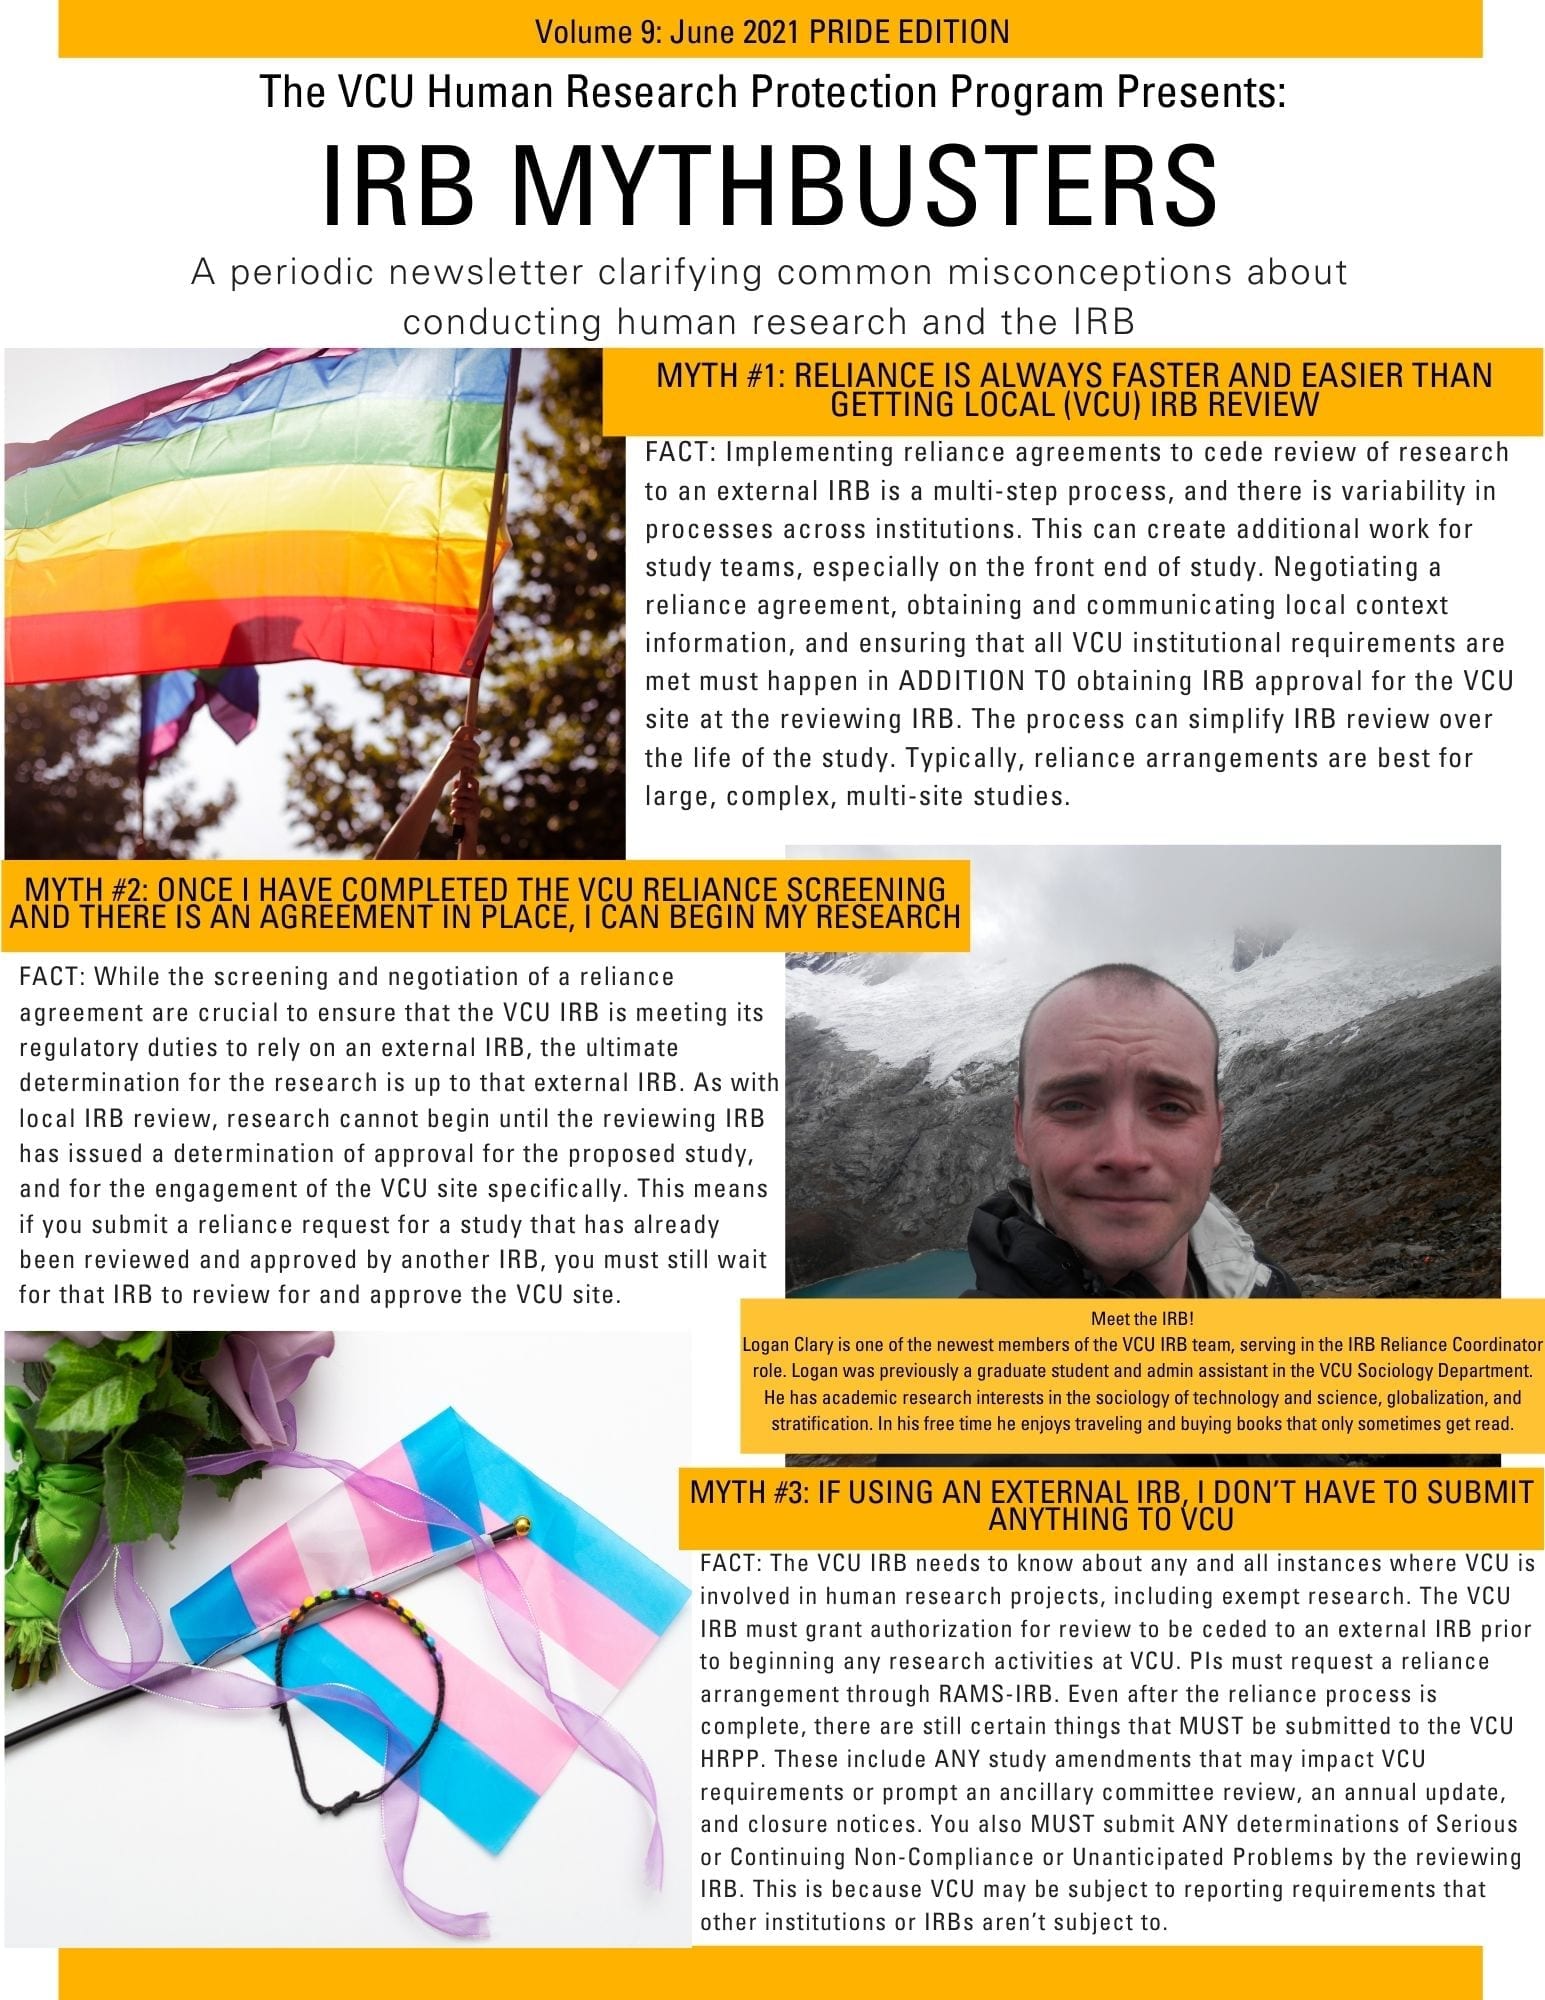 This is an image of the IRB Mythbusters Newsletter. It includes an image of the rainbow LGBTQ+ Pride flag and the transgender pride flag, and a third image, which shows a short-haired man standing in front of a lake and mountain range. The caption to that picture says “Meet the IRB! Logan Clary is one of the newest members of the VCU IRB team, serving in the IRB Reliance Coordinator role. Logan was previously a graduate student and admin assistant in the VCU Sociology Department. He has academic research interests in the sociology of technology and science, globalization, and stratification. In his free time he enjoys traveling and buying books that only sometimes get read.” The rest of the newsletter contains the same myths and facts as the blog post.